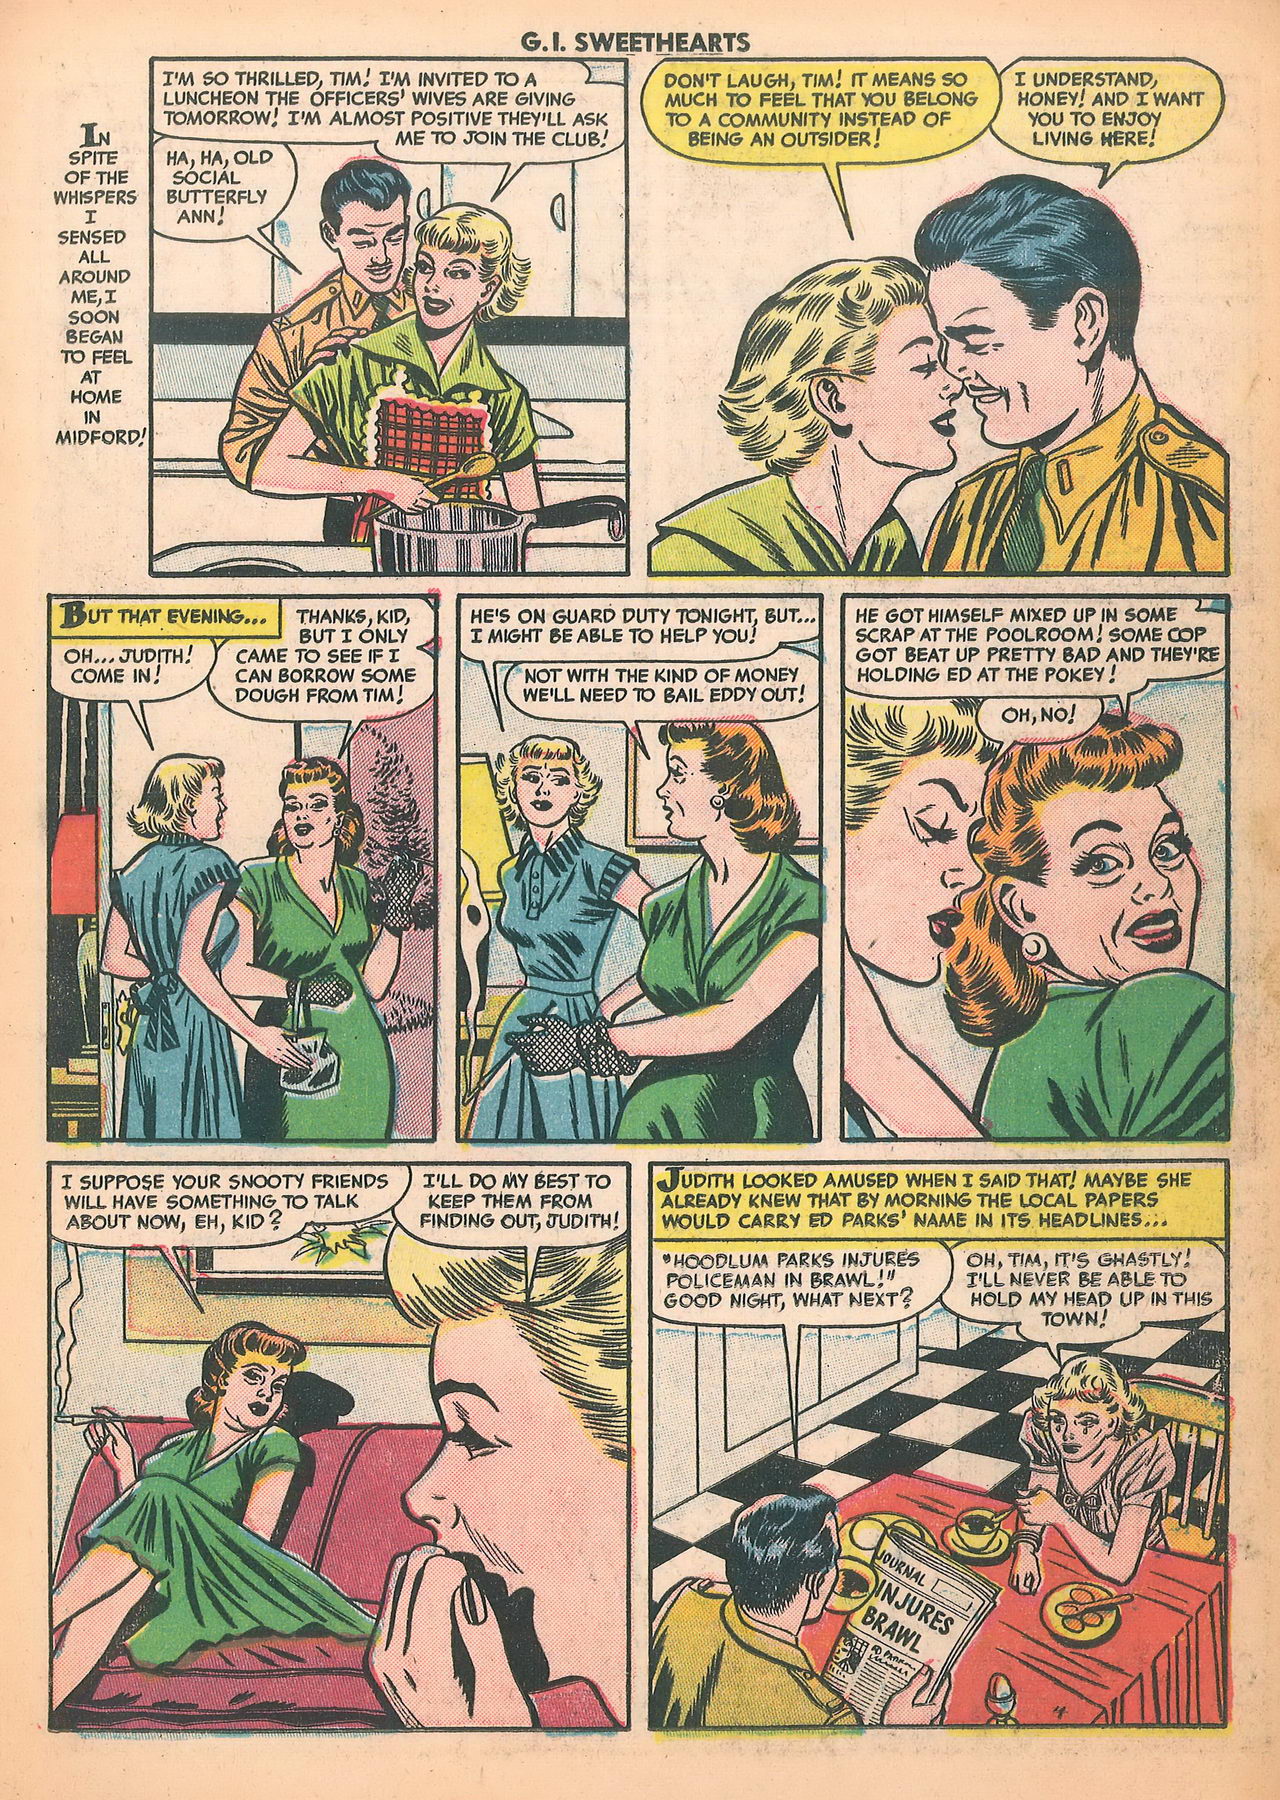 Read online G.I. Sweethearts comic -  Issue #37 - 15